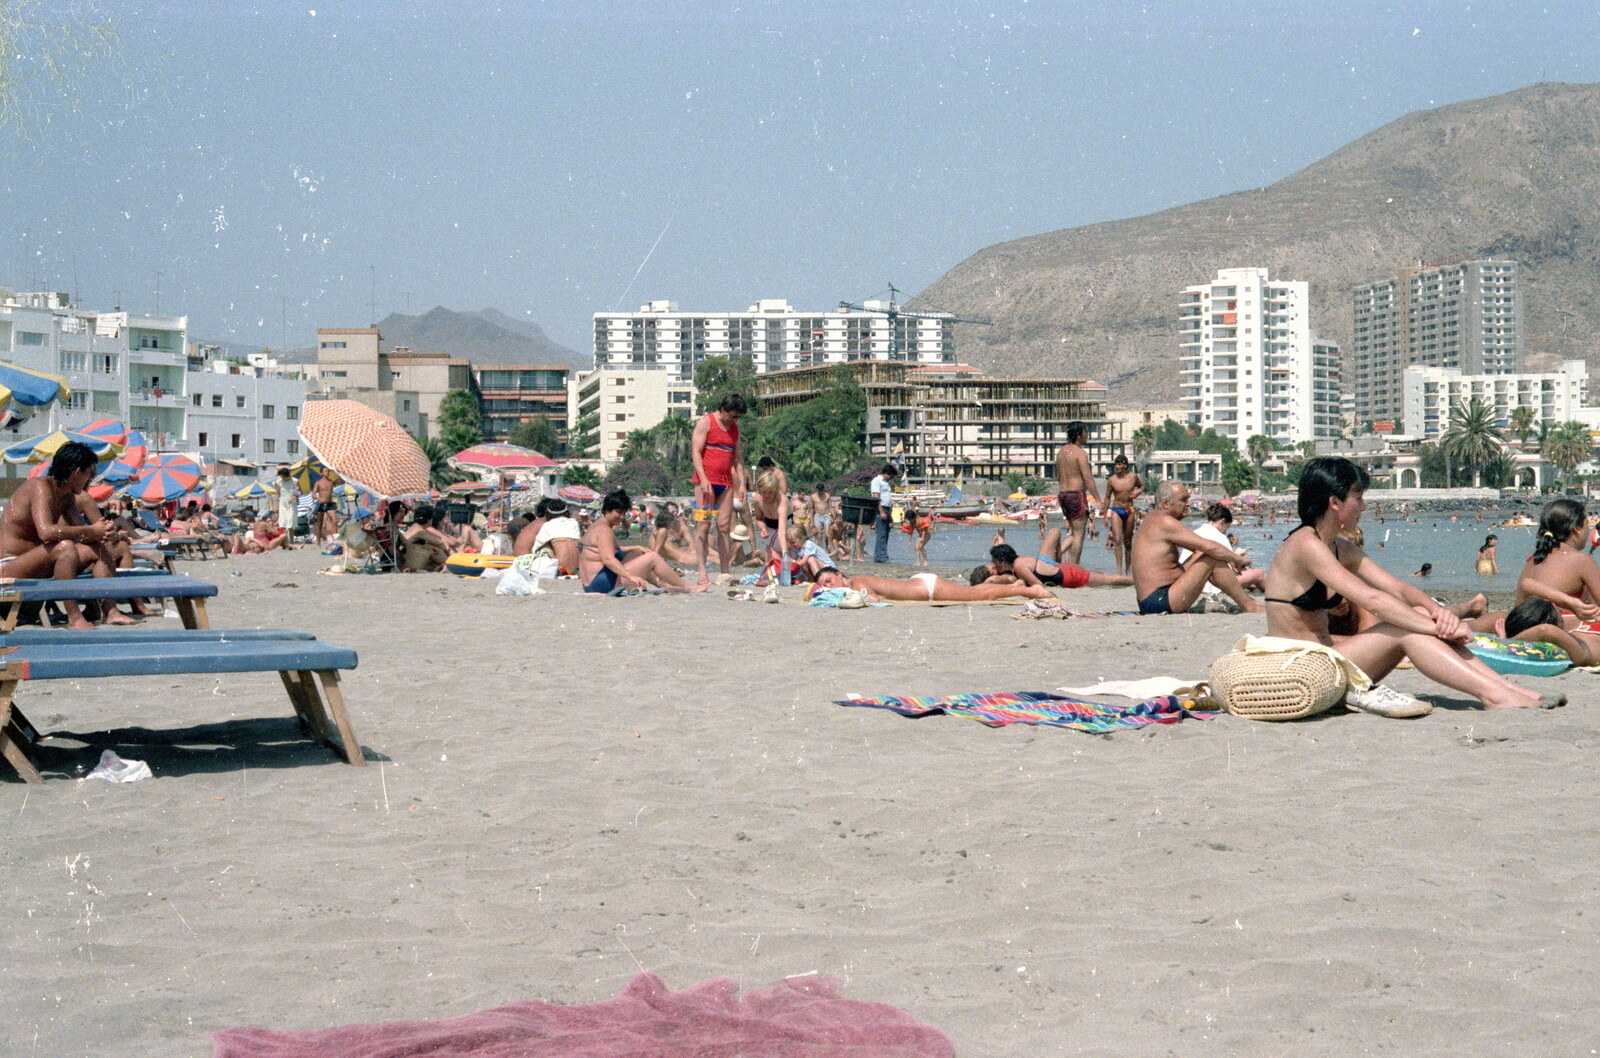 Los Christianos beach from A Holiday in Los Christianos, Tenerife - 19th June 1985